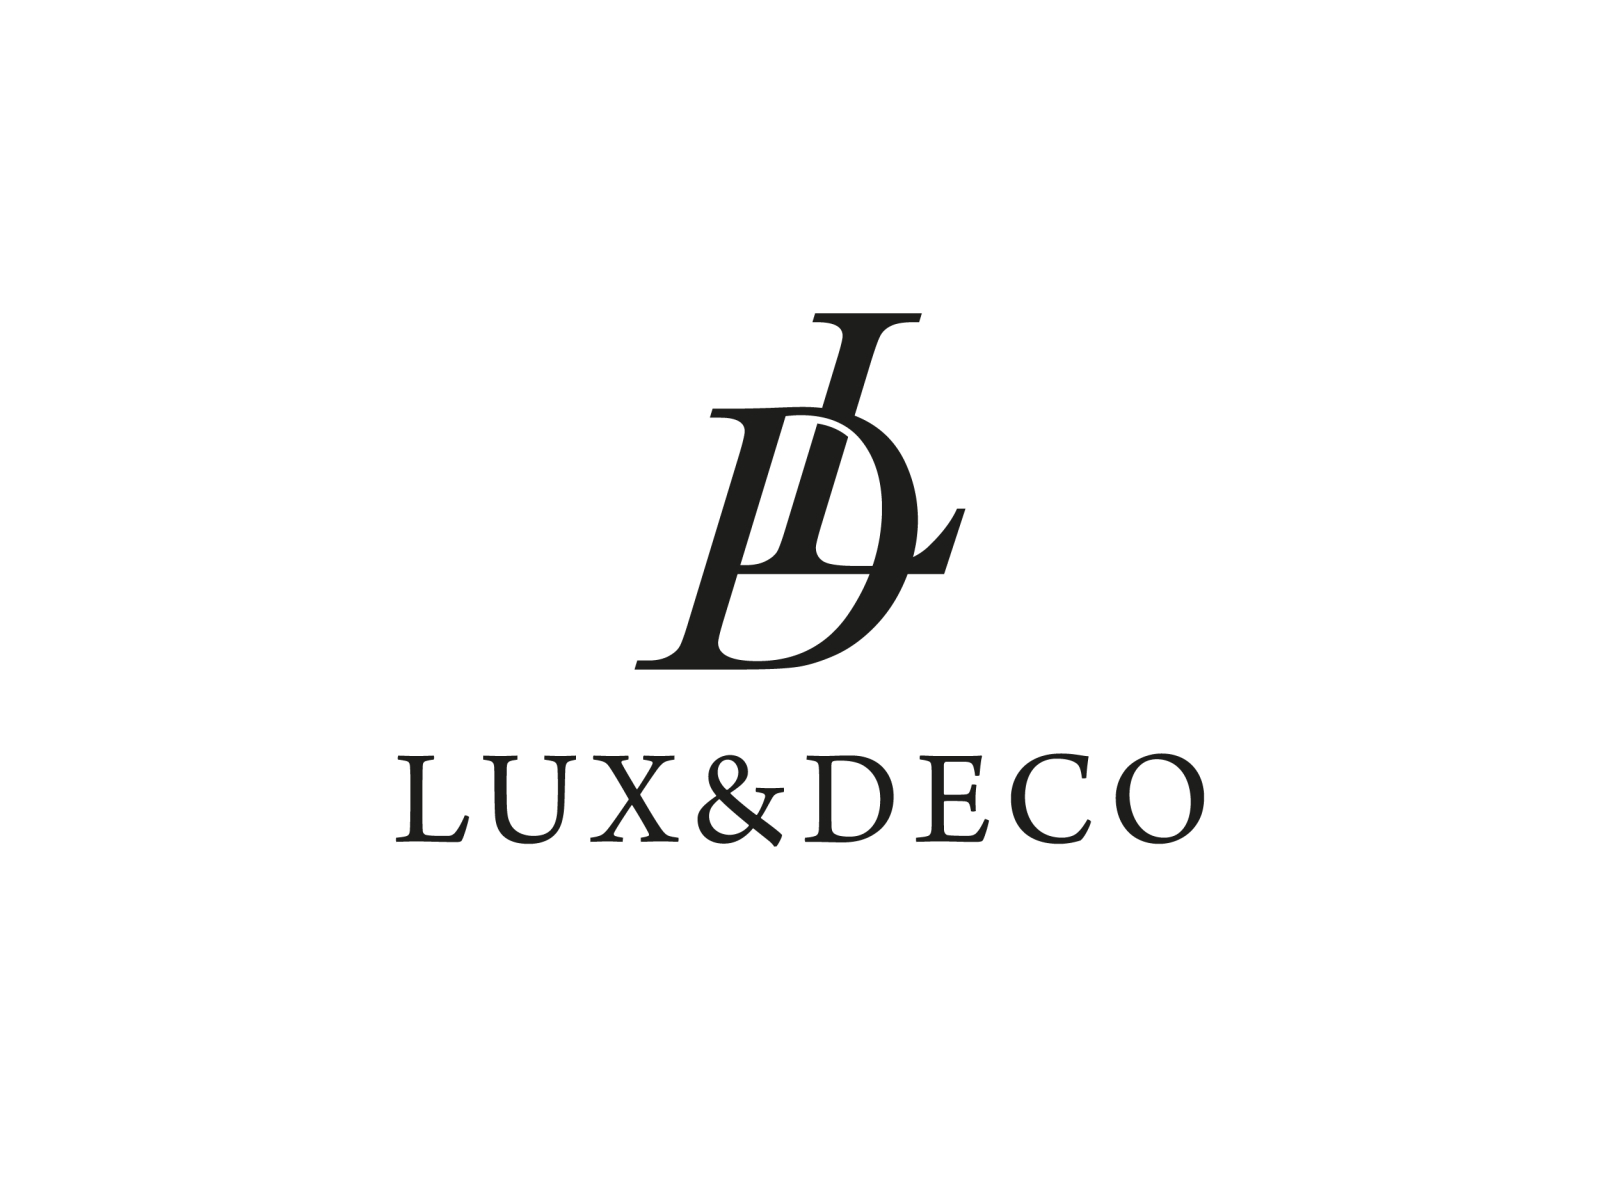 Branding identity for Lux&Deco. by Ali Fatih Yüce on Dribbble